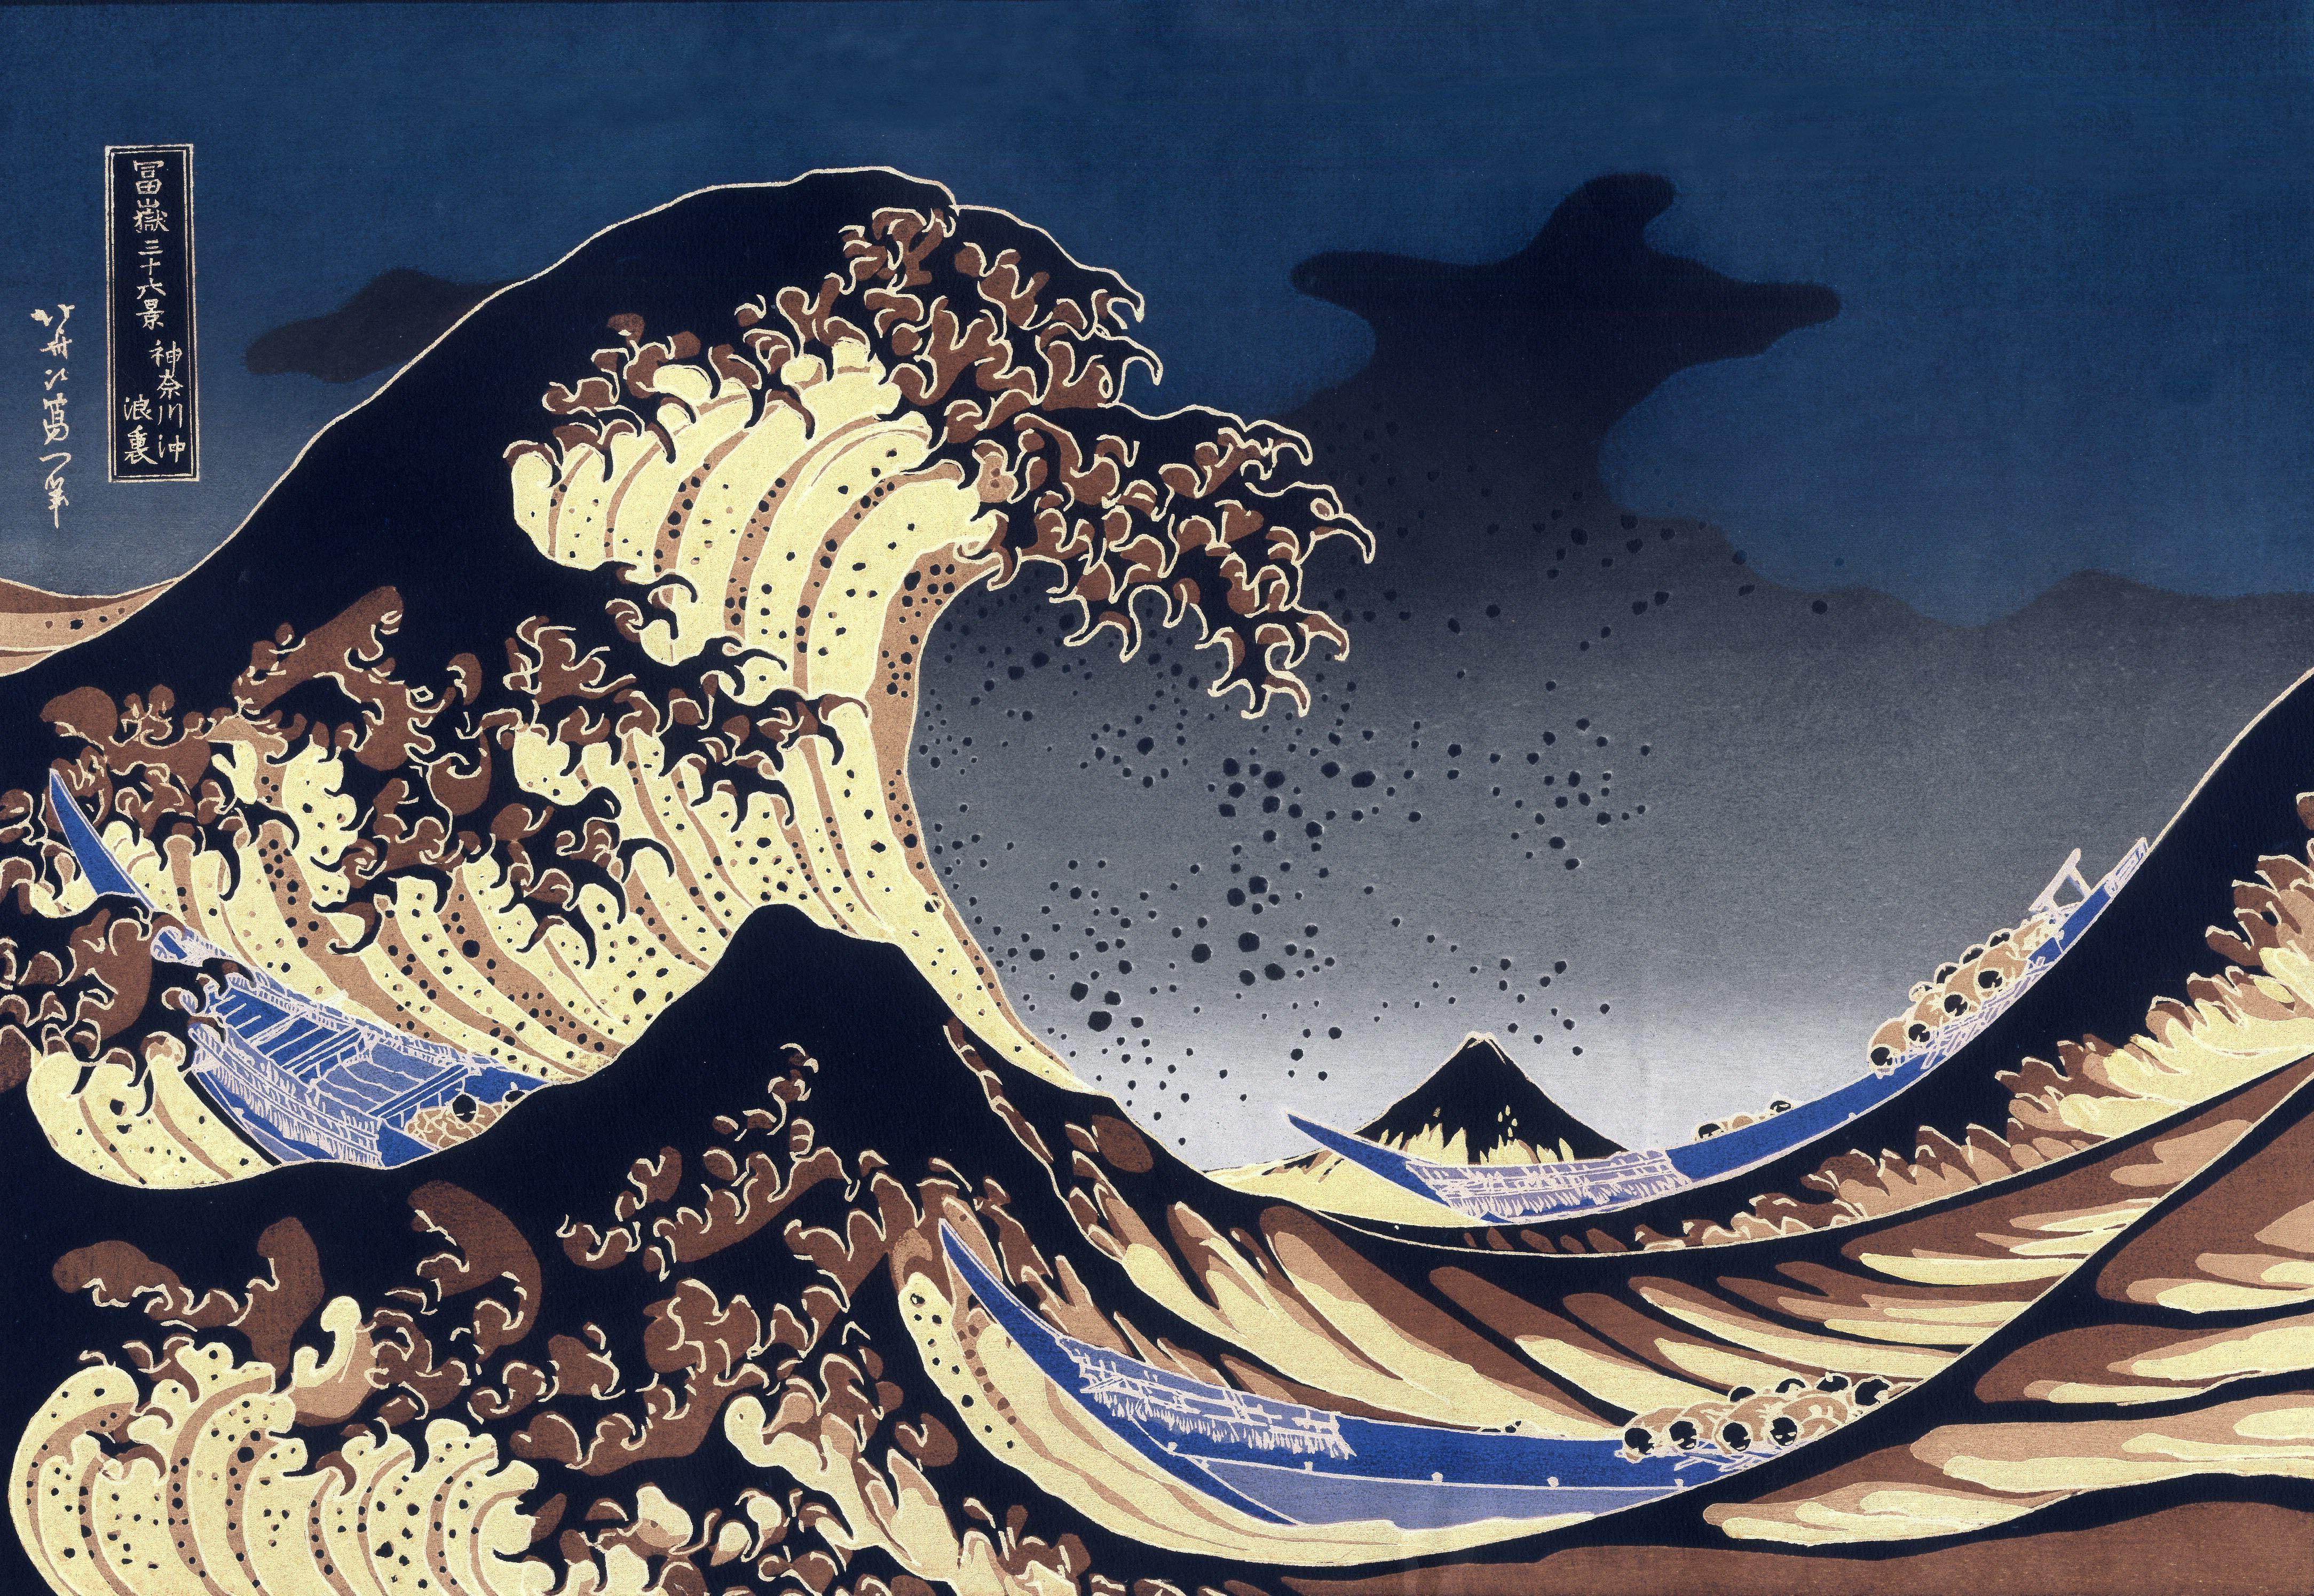 4335 x 2990 · jpeg - Wave Japanese Art Wallpapers - Top Free Wave Japanese Art Backgrounds ...